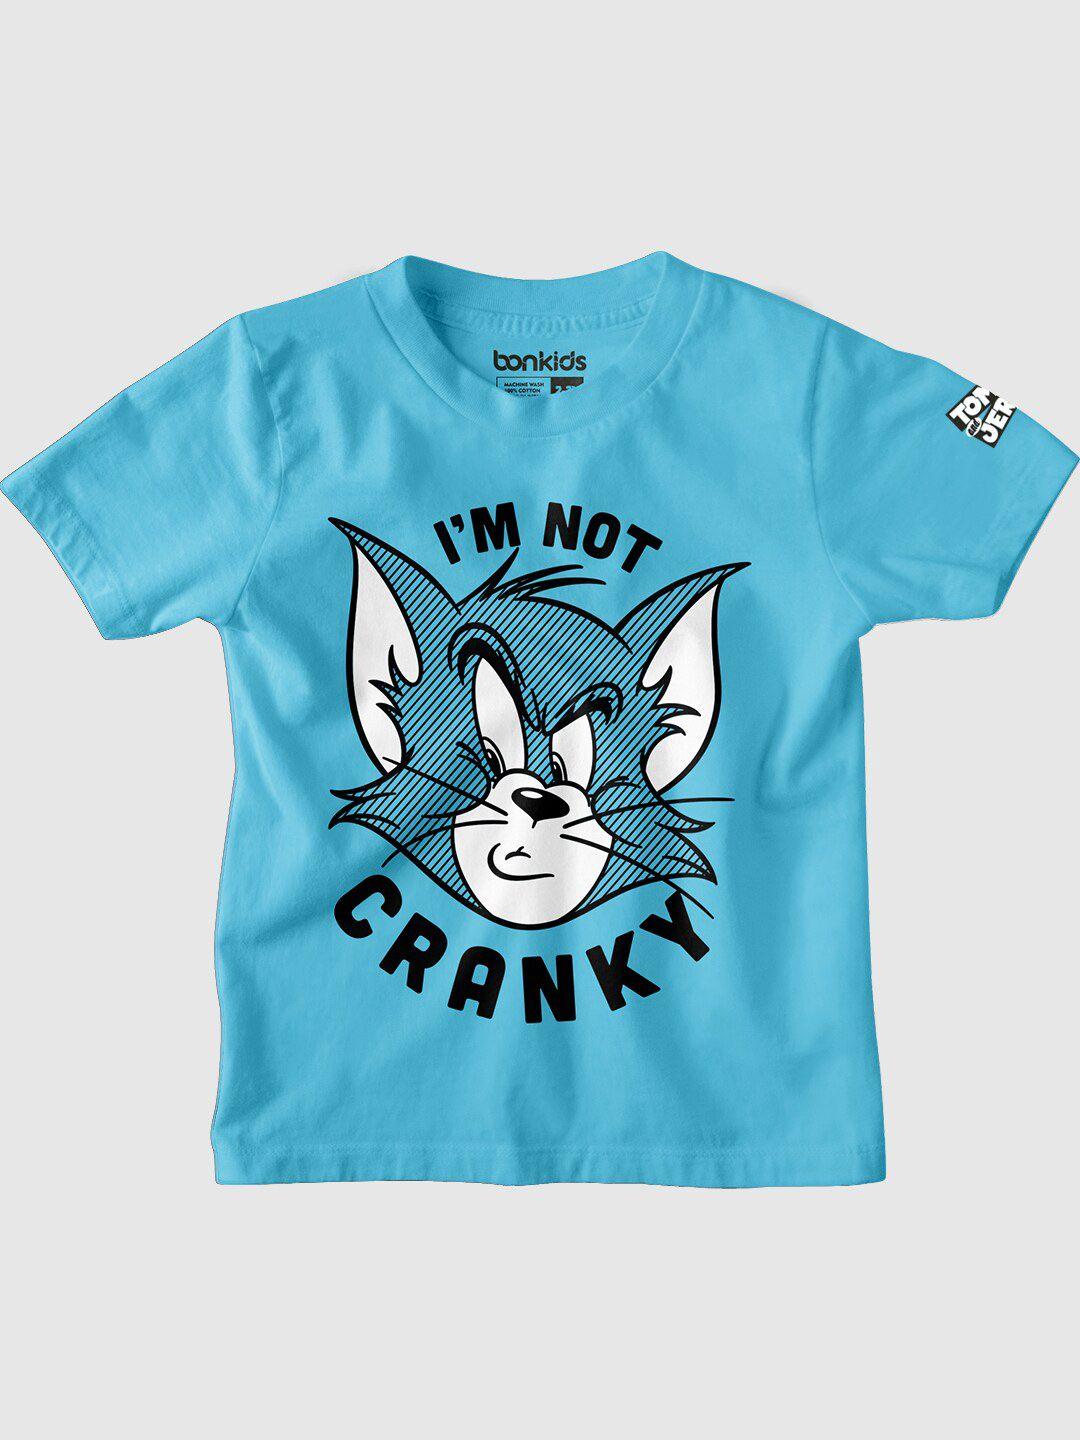 BONKIDS Boys Tom & jerry Printed Cotton Casual T-Shirt